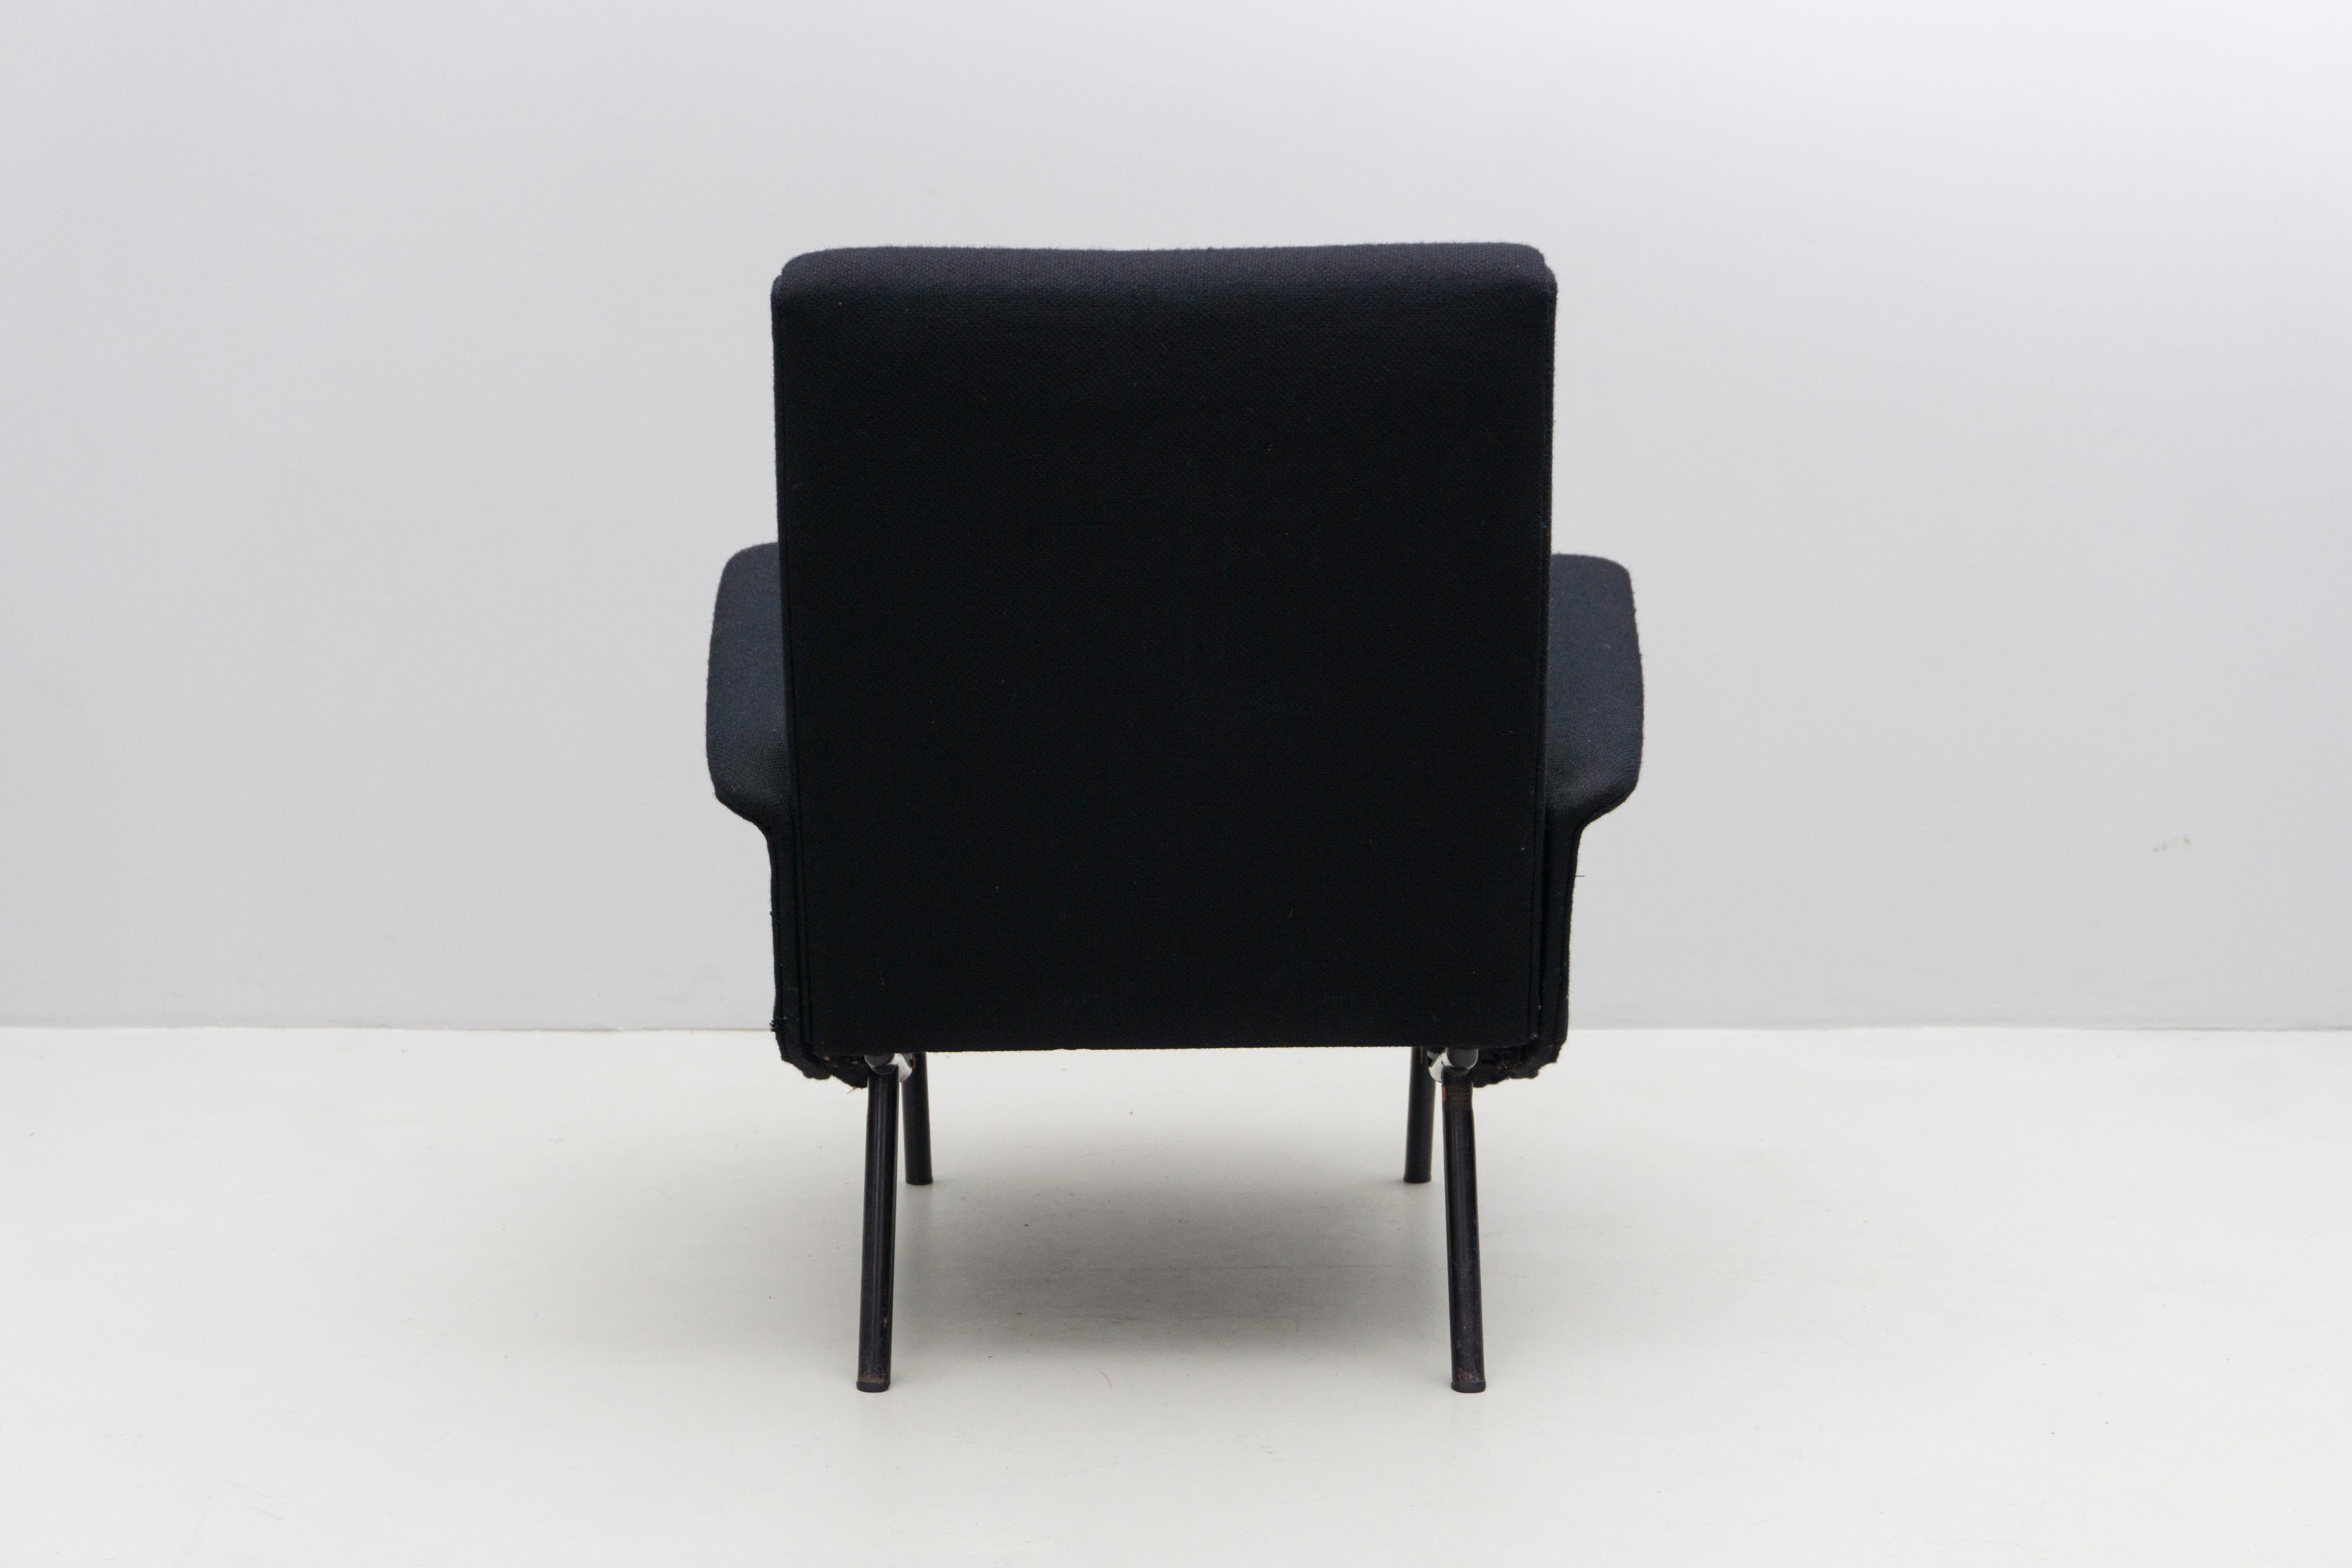 Lacquered Pair of Armchairs by Osvaldo Borsani, black wool, manufactured by TECNO, 1955